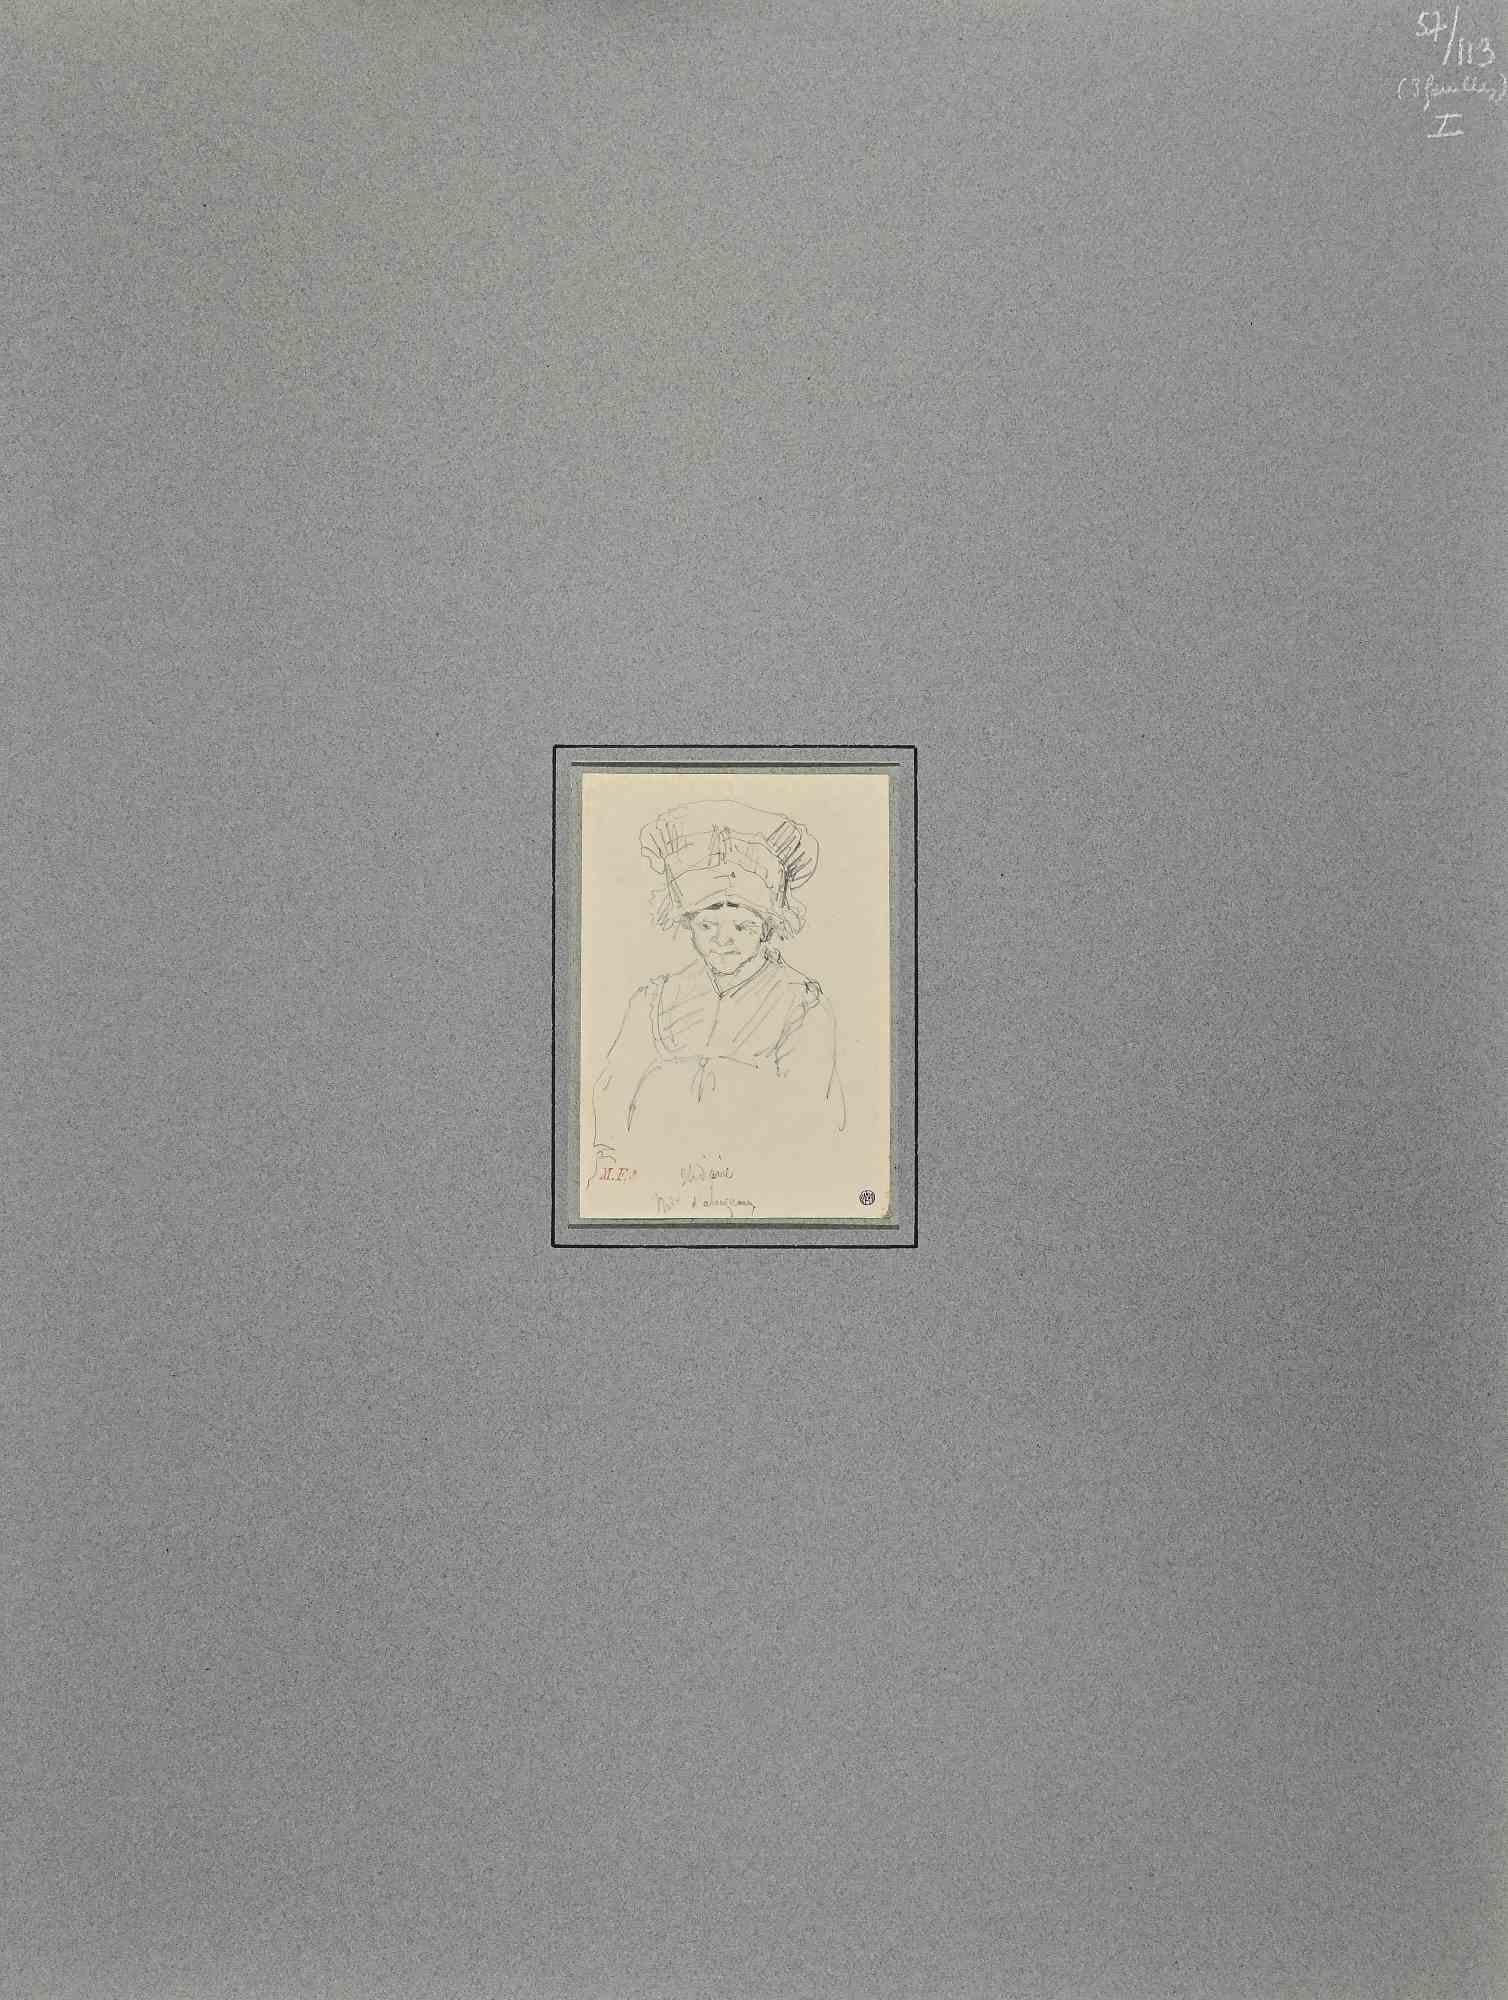 The Maid Portrait is a drawing in pencil on creamy-colored paper, realized by French painter Léon Morel-Fatio (1810-1871) in the 19th century.

Monogrammed in red on the lower.

Applied on cardboard and included a greyish Passepartout.

Good